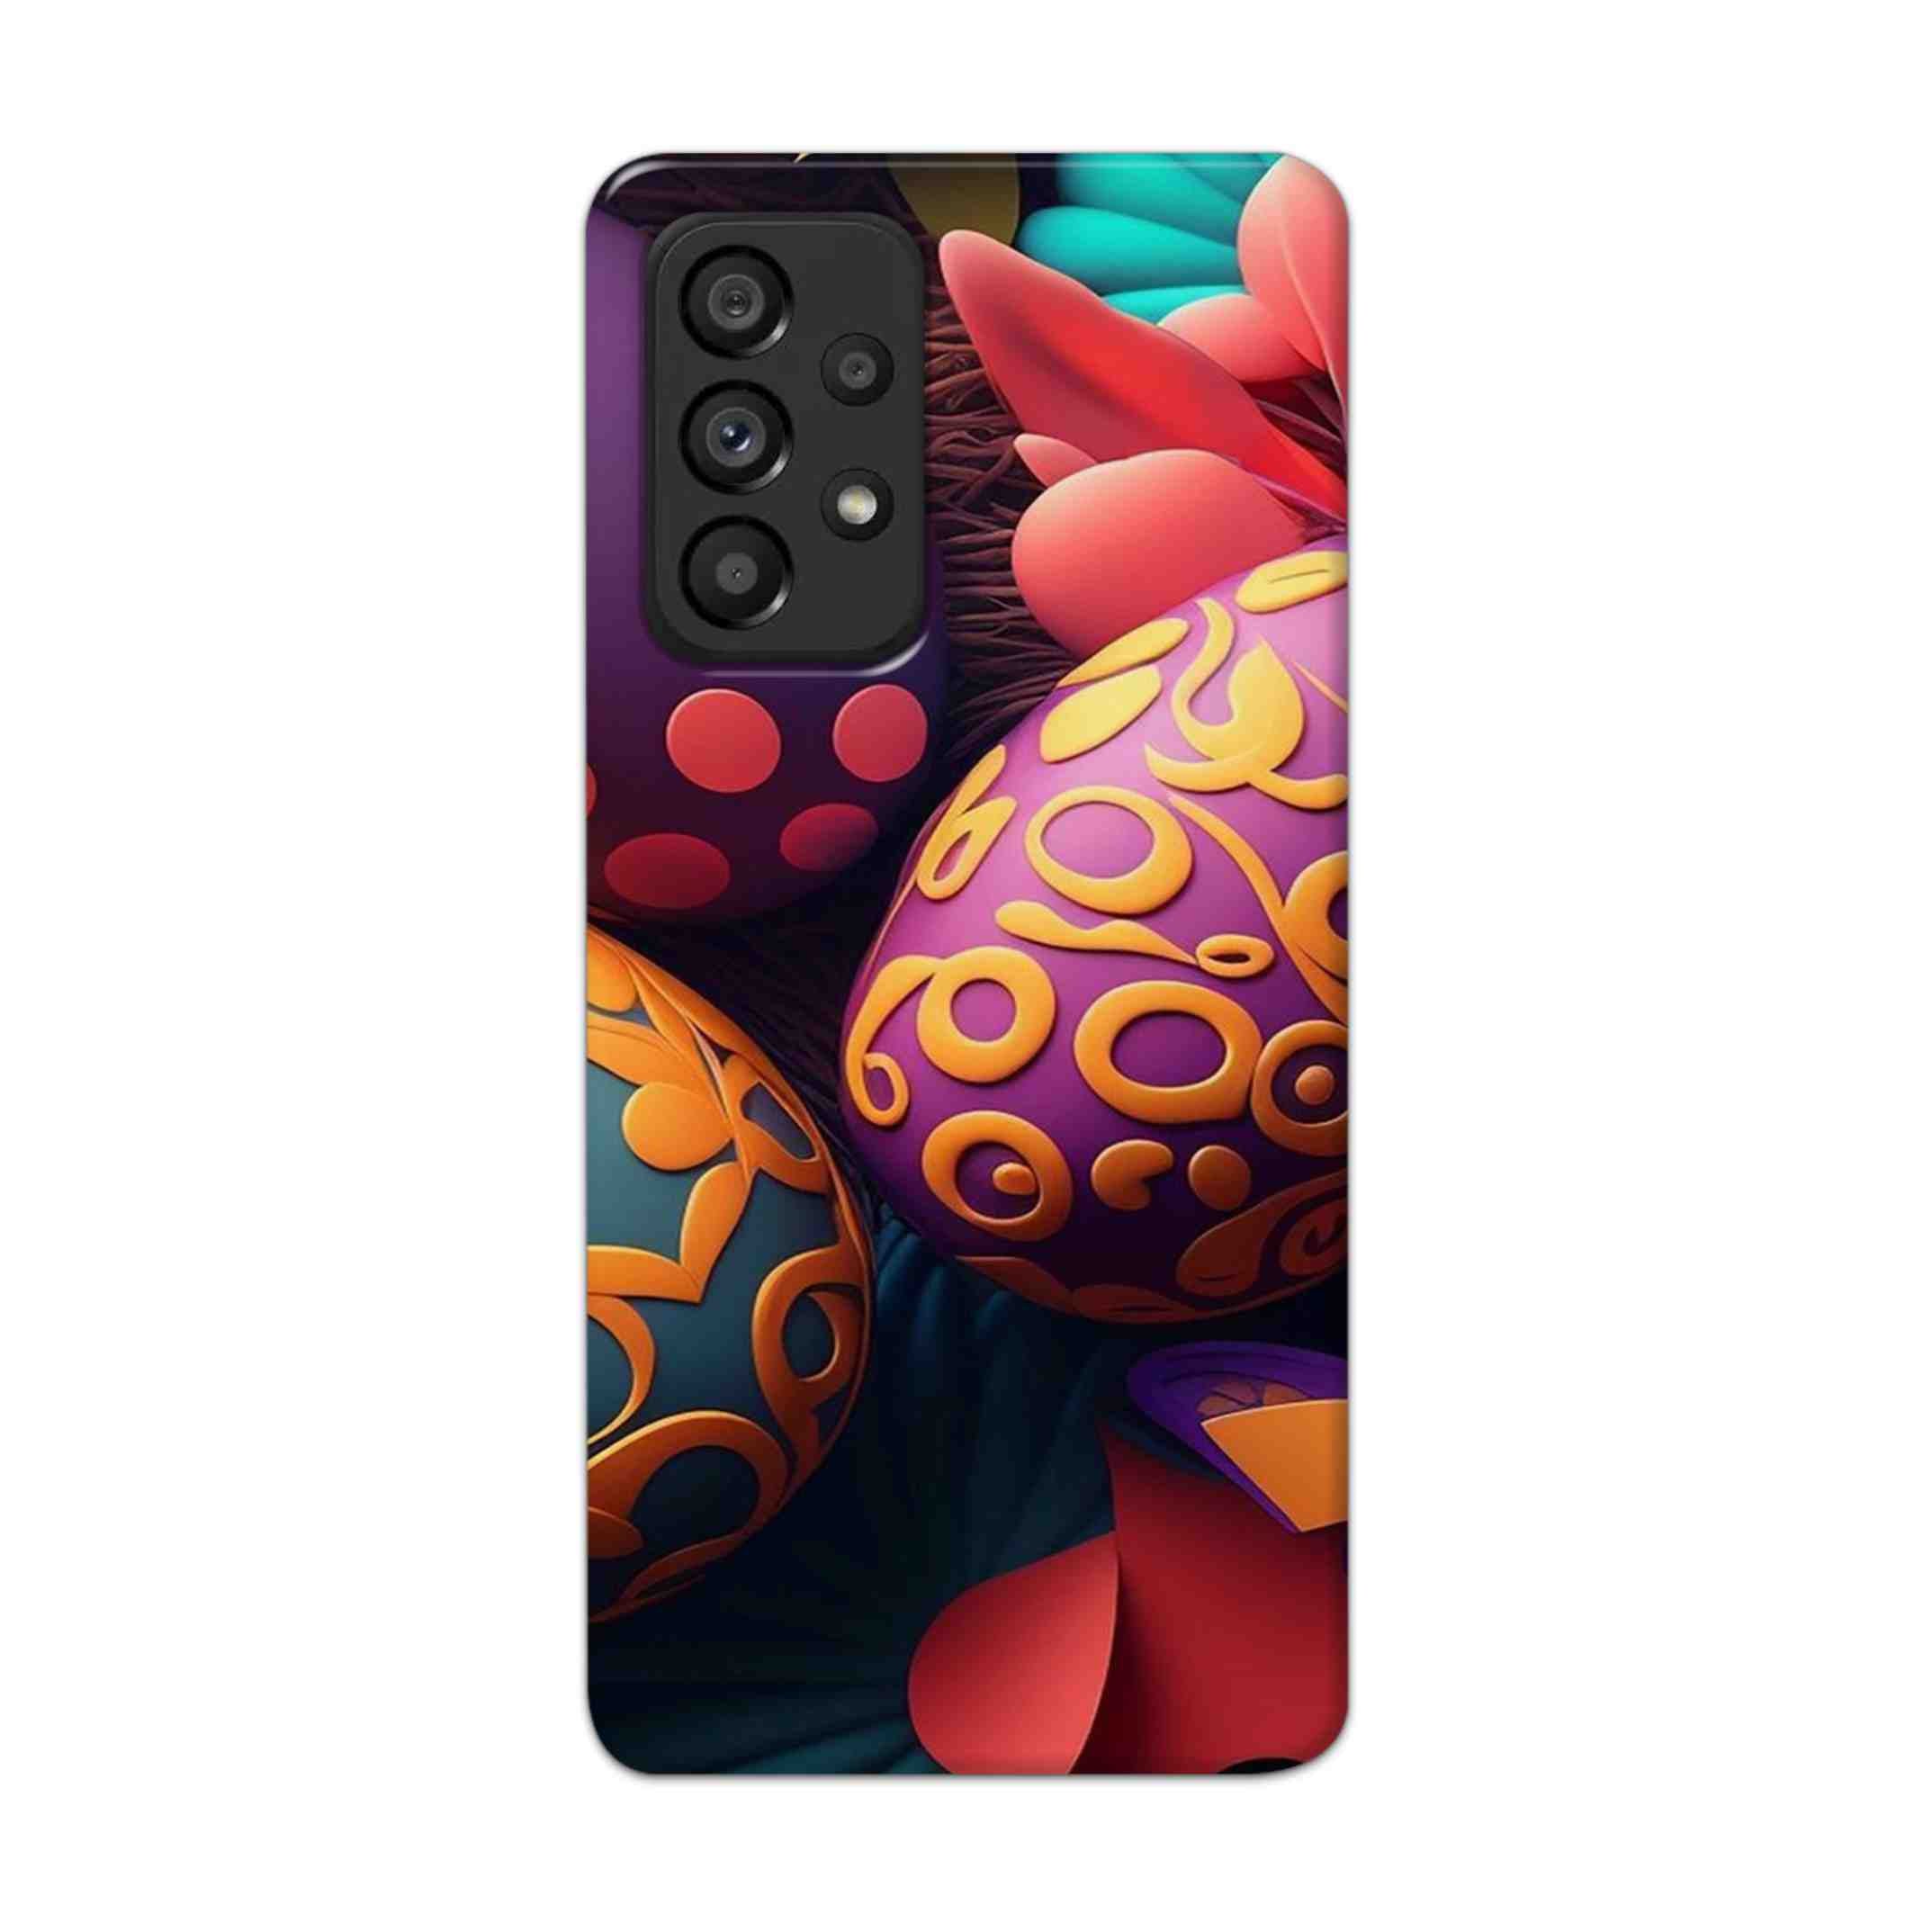 Buy Easter Egg Hard Back Mobile Phone Case Cover For Samsung Galaxy A53 5G Online